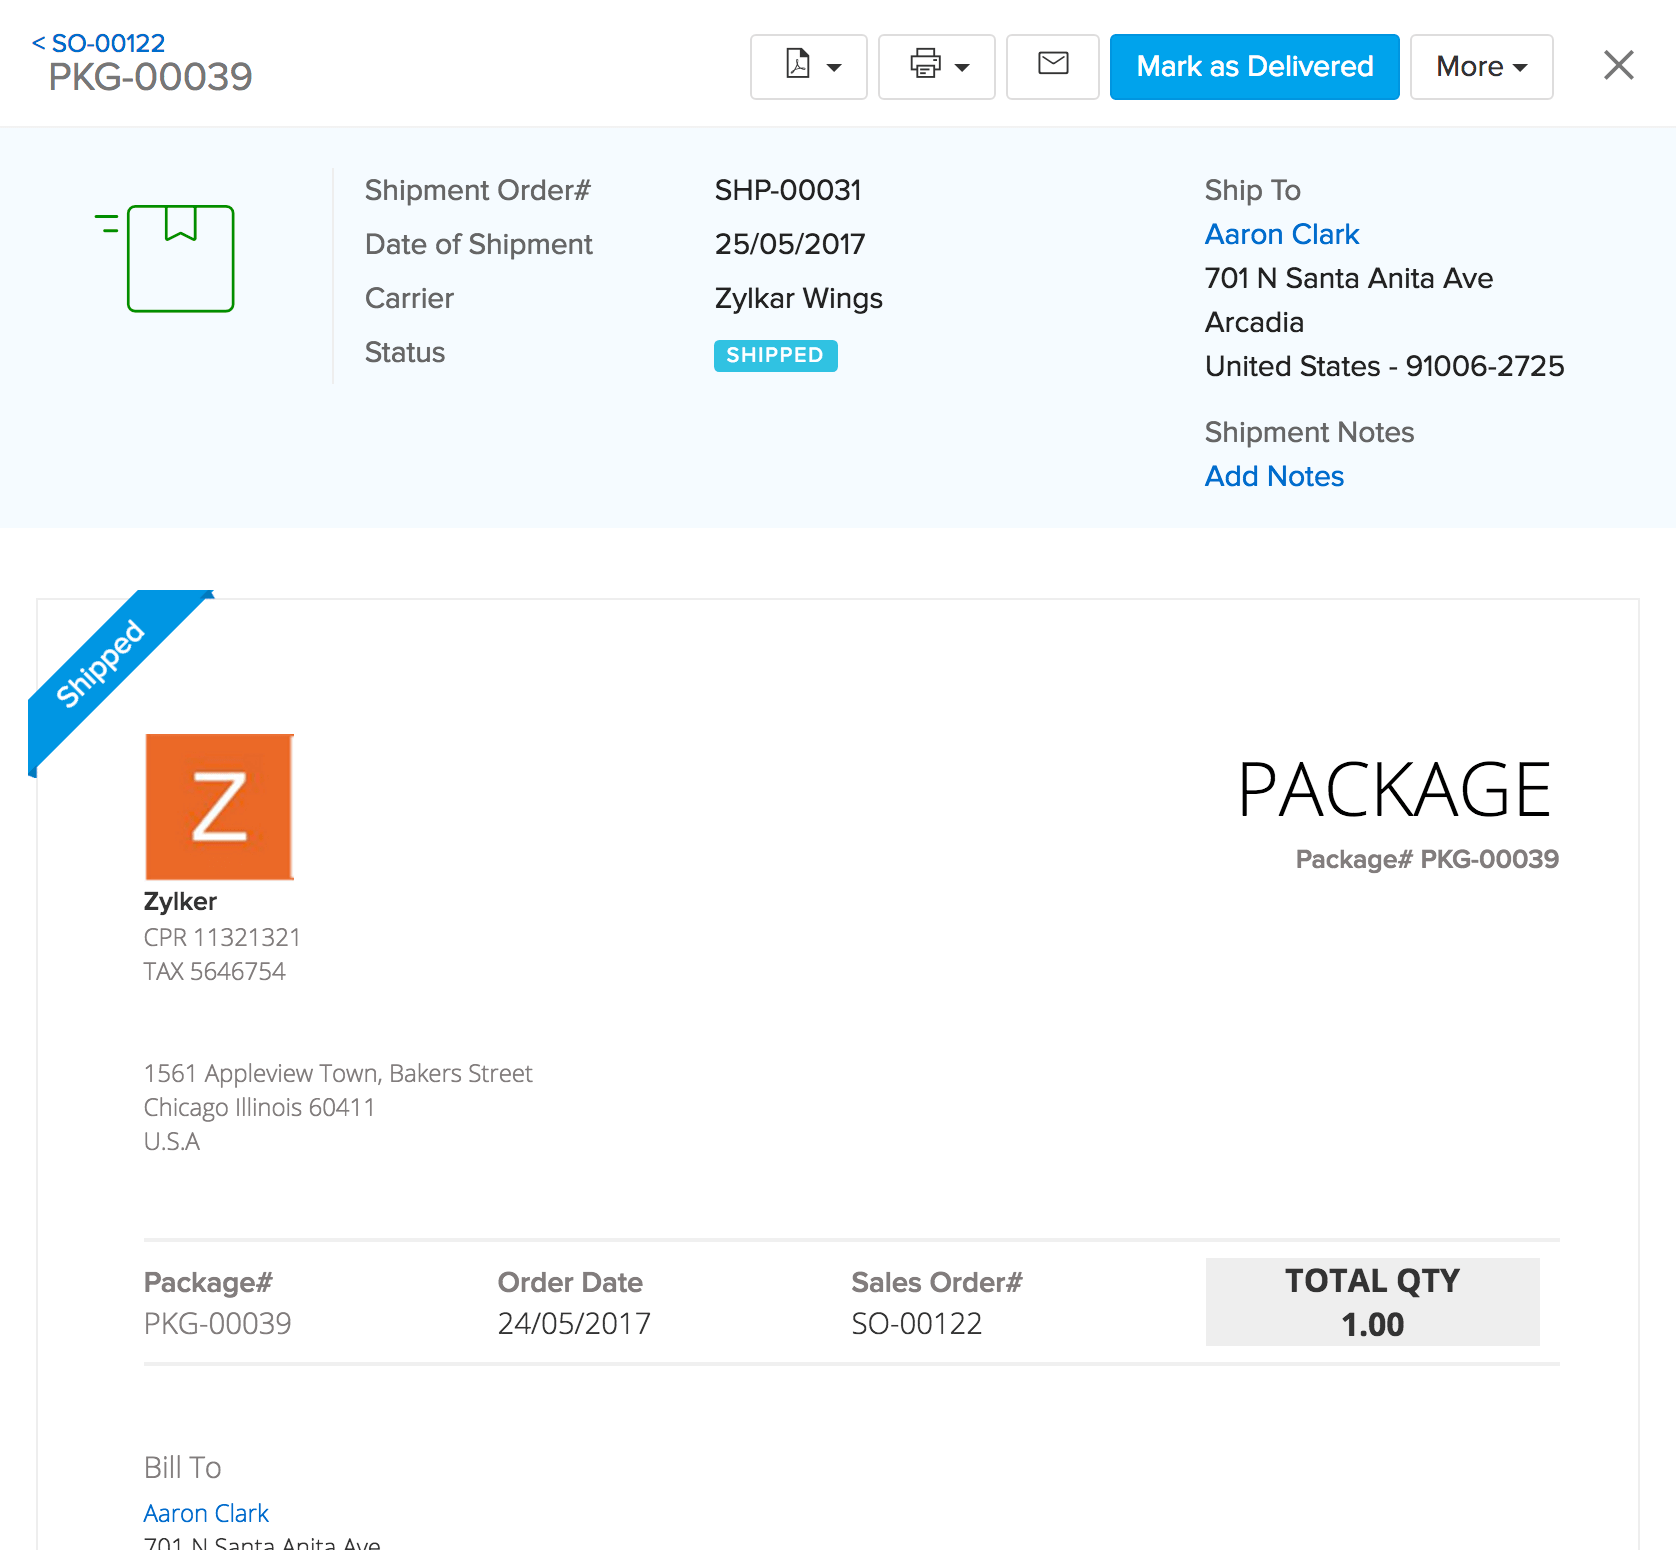 Image of the Package slip with shipped status